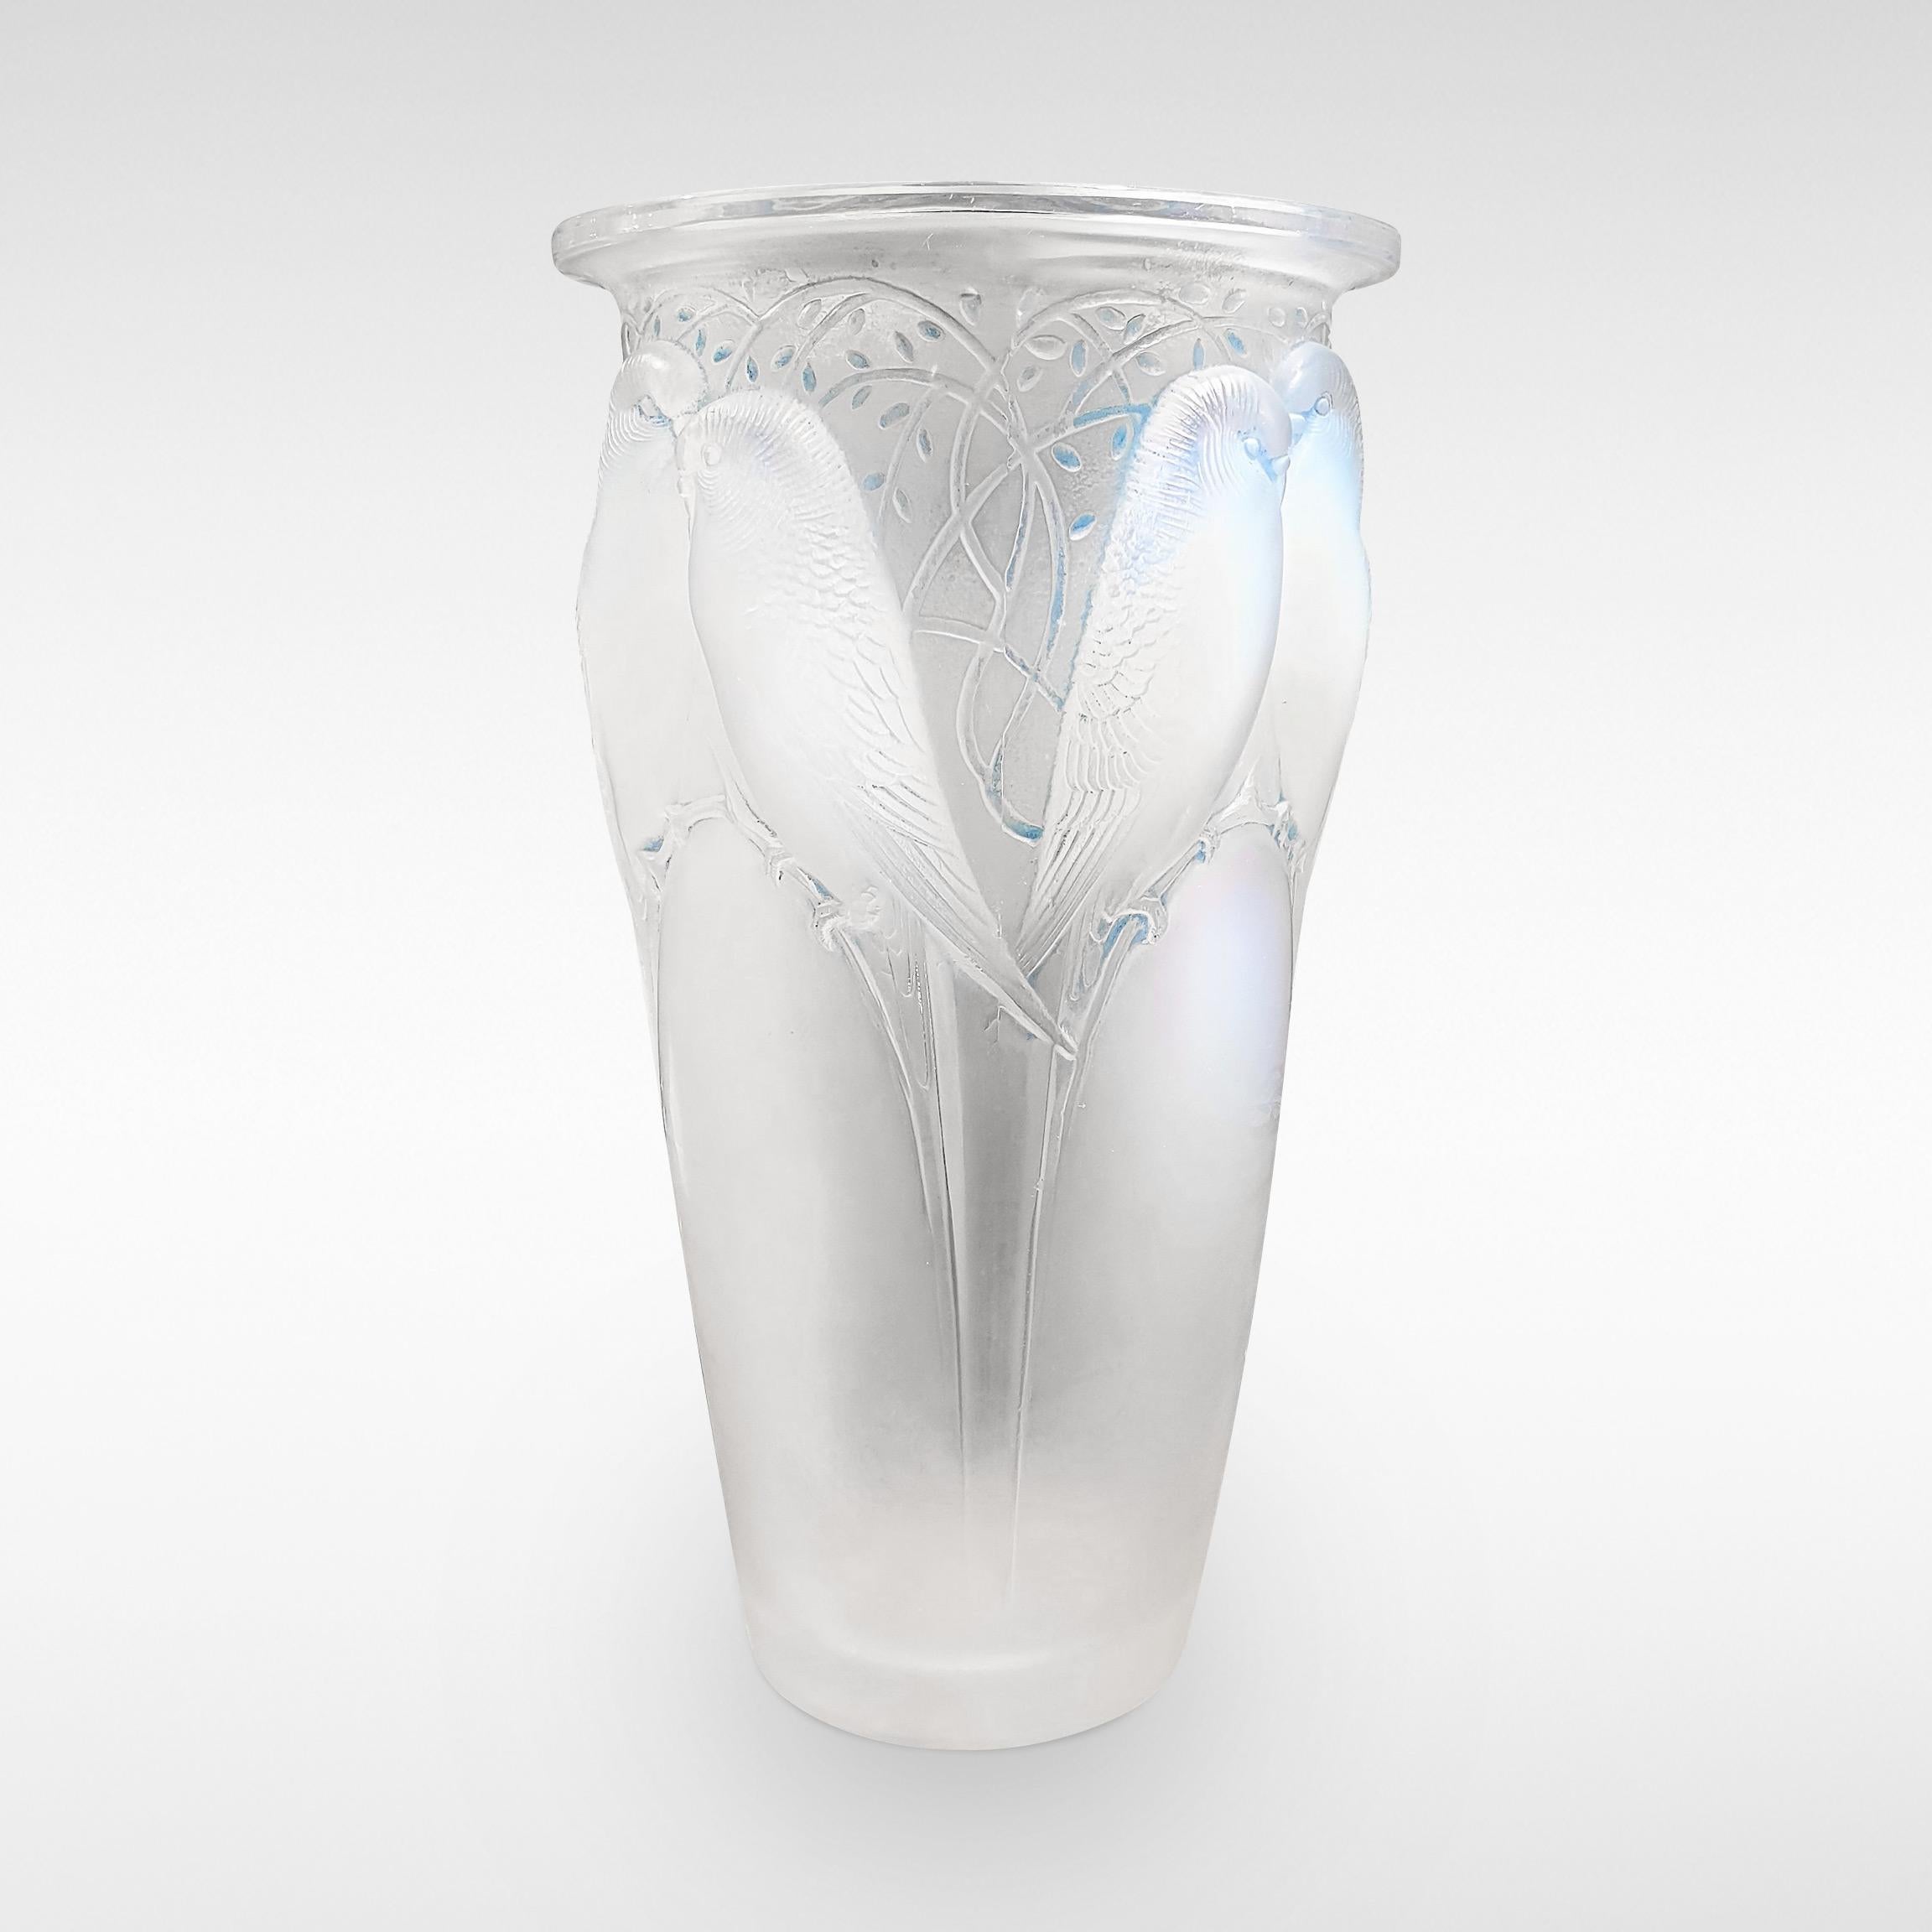 'Ceylan' vase by Rene Lalique with original blue staining, designed 1924
Marchilac 905.